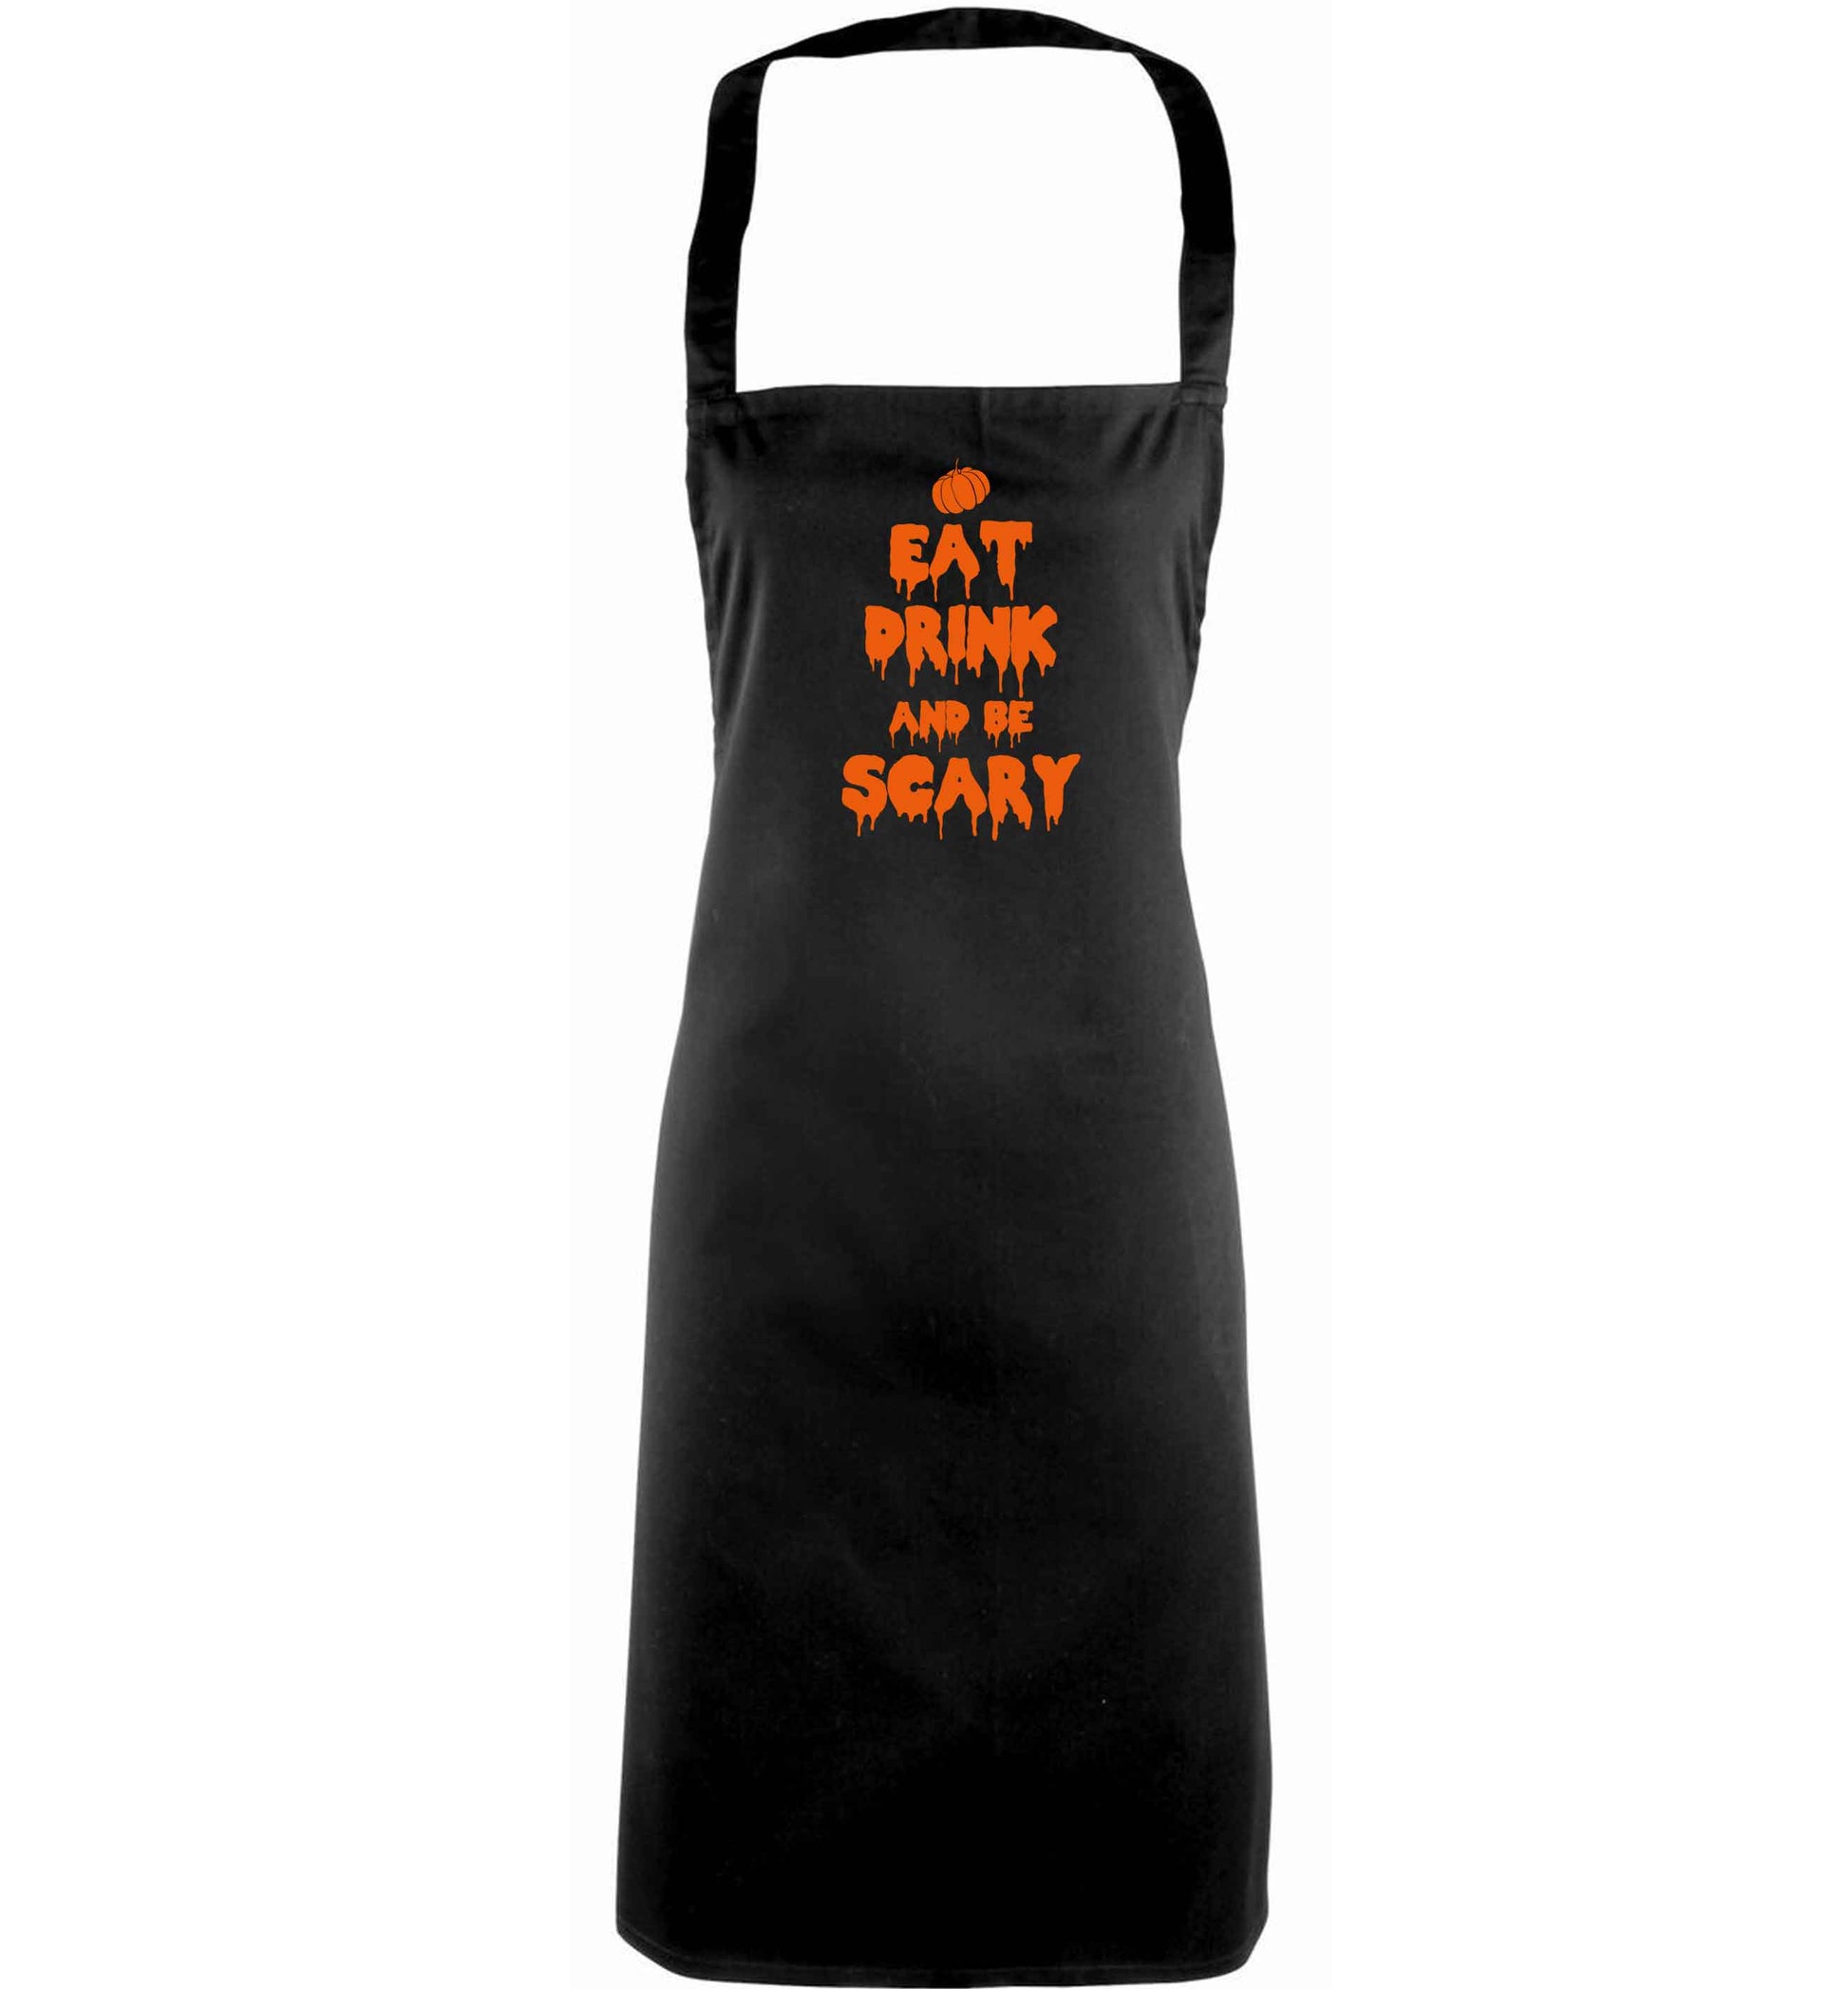 Eat drink and be scary adults black apron